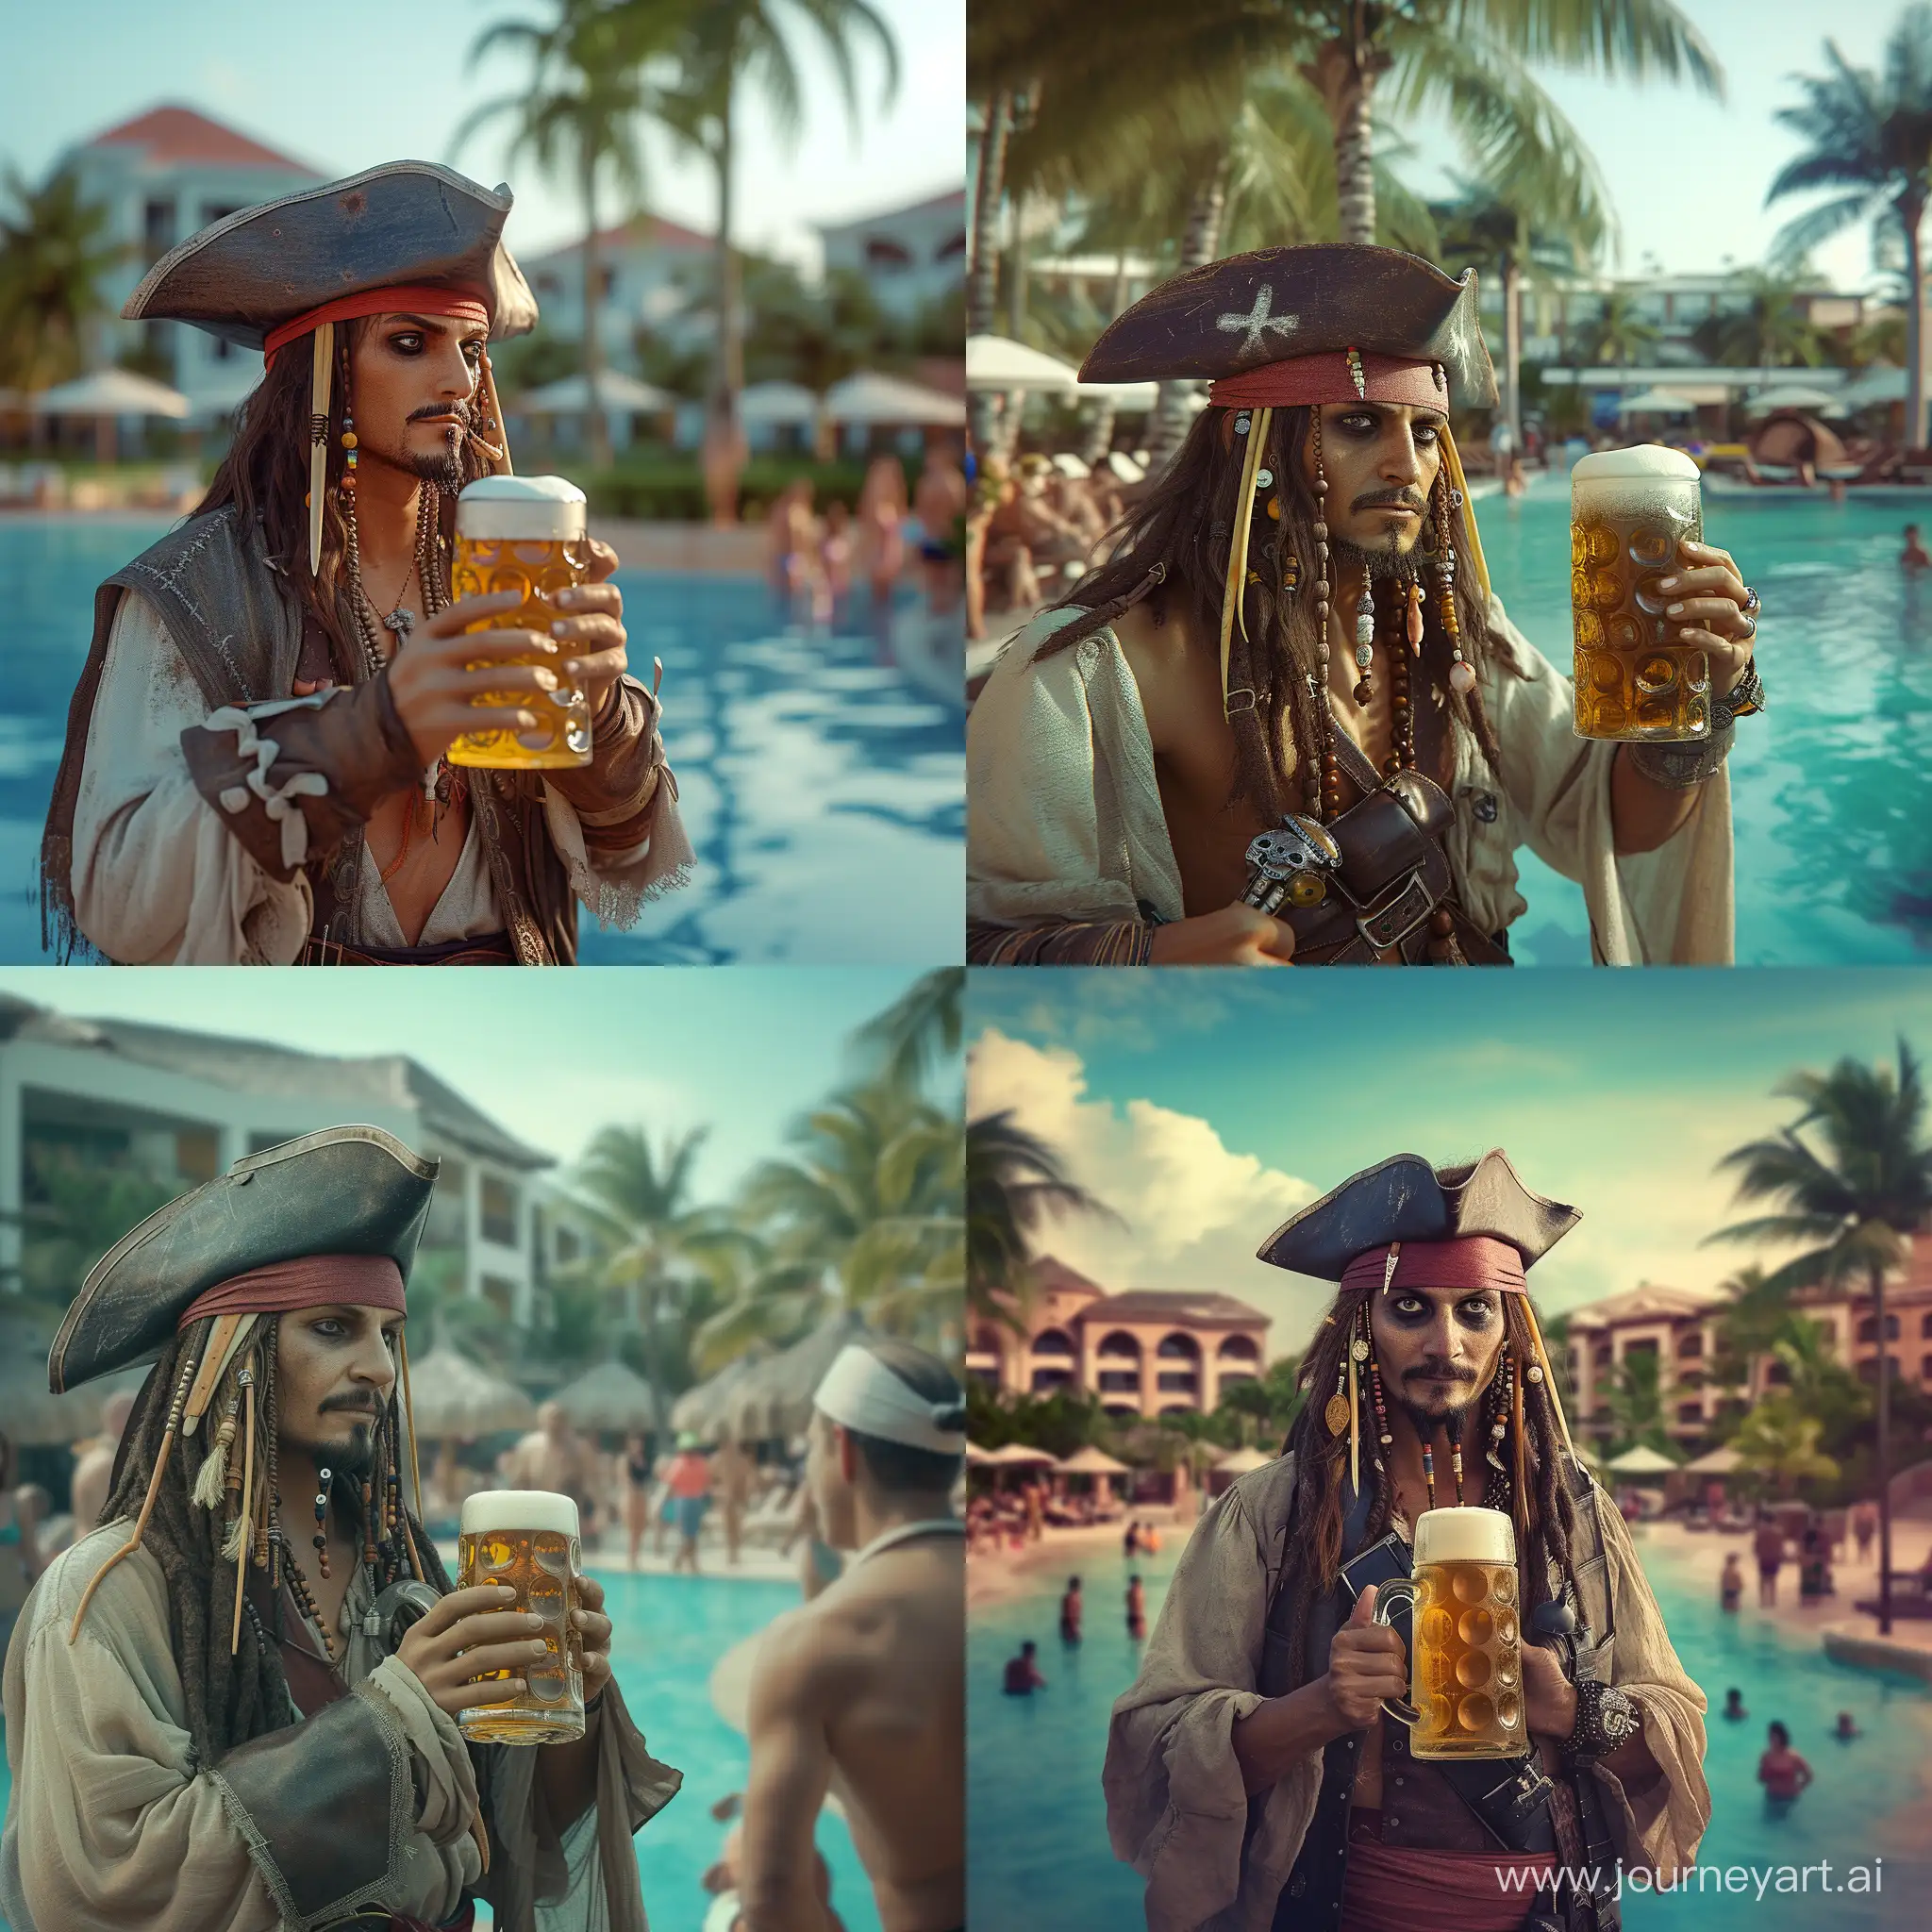 PirateThemed-Caribbean-Cheers-at-AllInclusive-Hotel-in-Punta-Cana